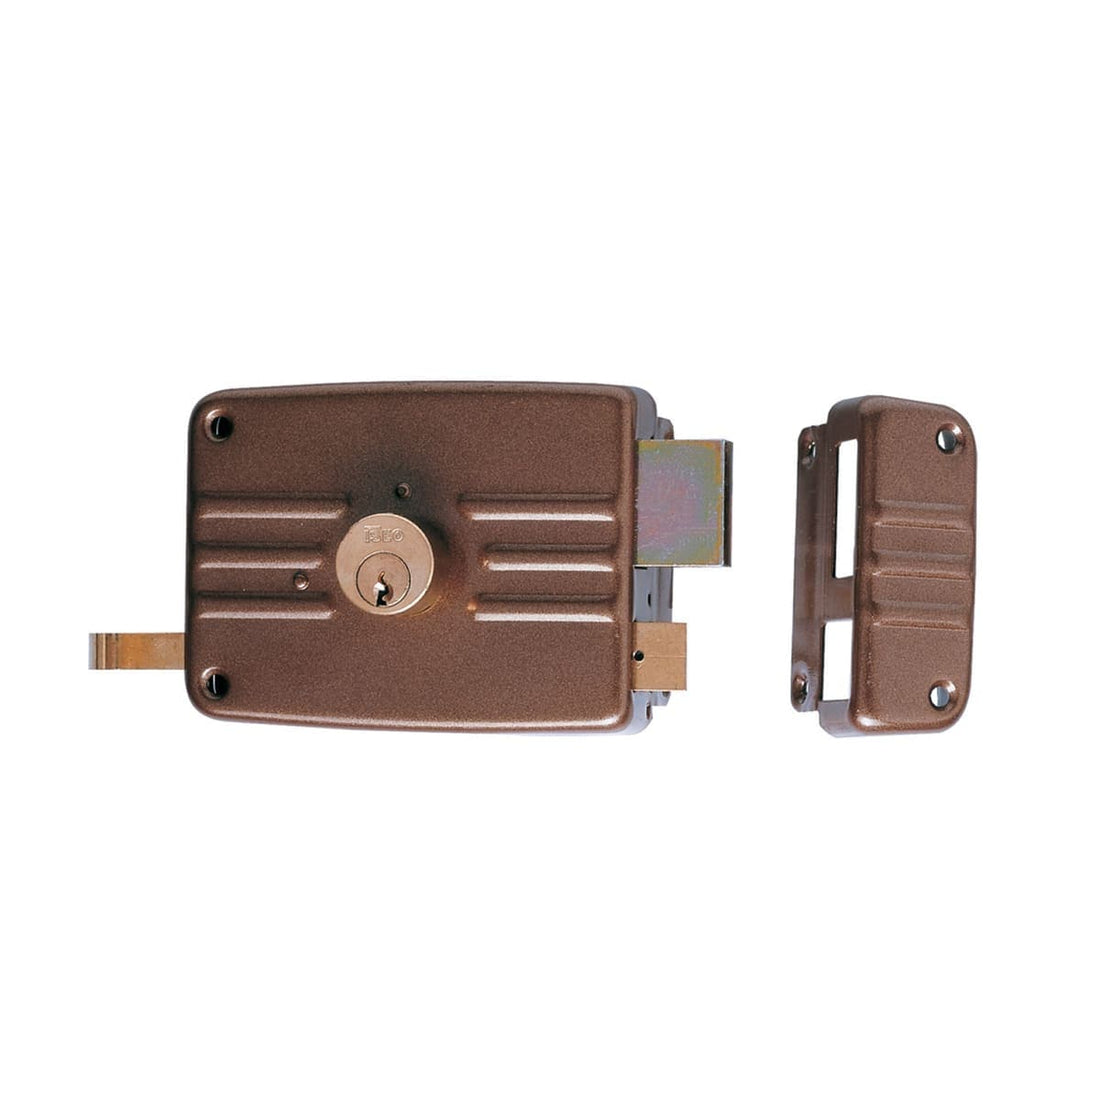 RIGHT LOCK FIXED CYLINDER LATCH ENTRY 50 PAINTED IRON - best price from Maltashopper.com BR410210645